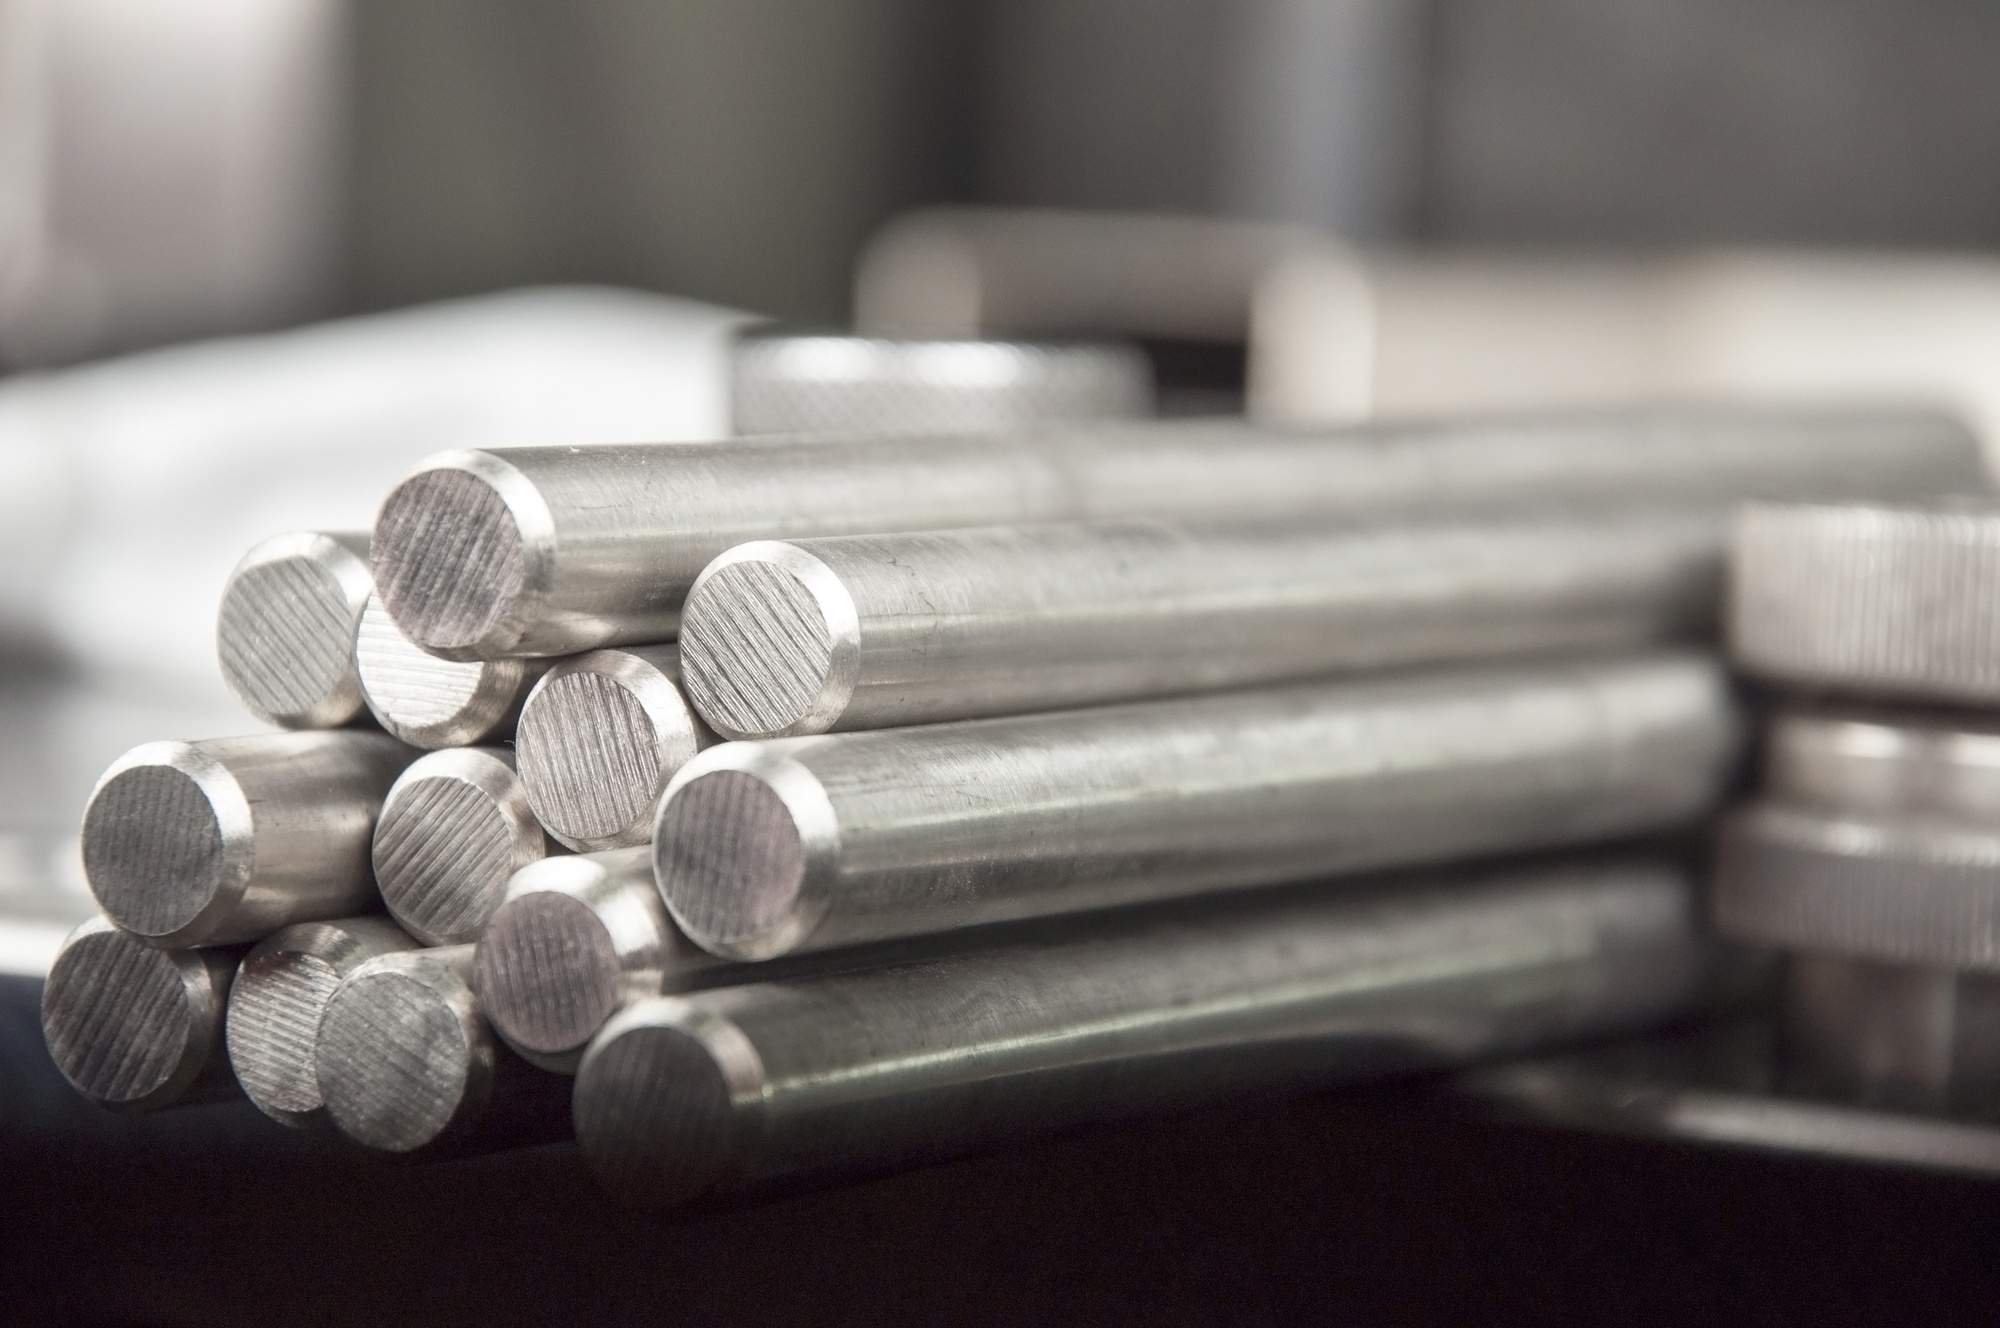 Carbon Steel vs Stainless Steel: What Are the Differences?